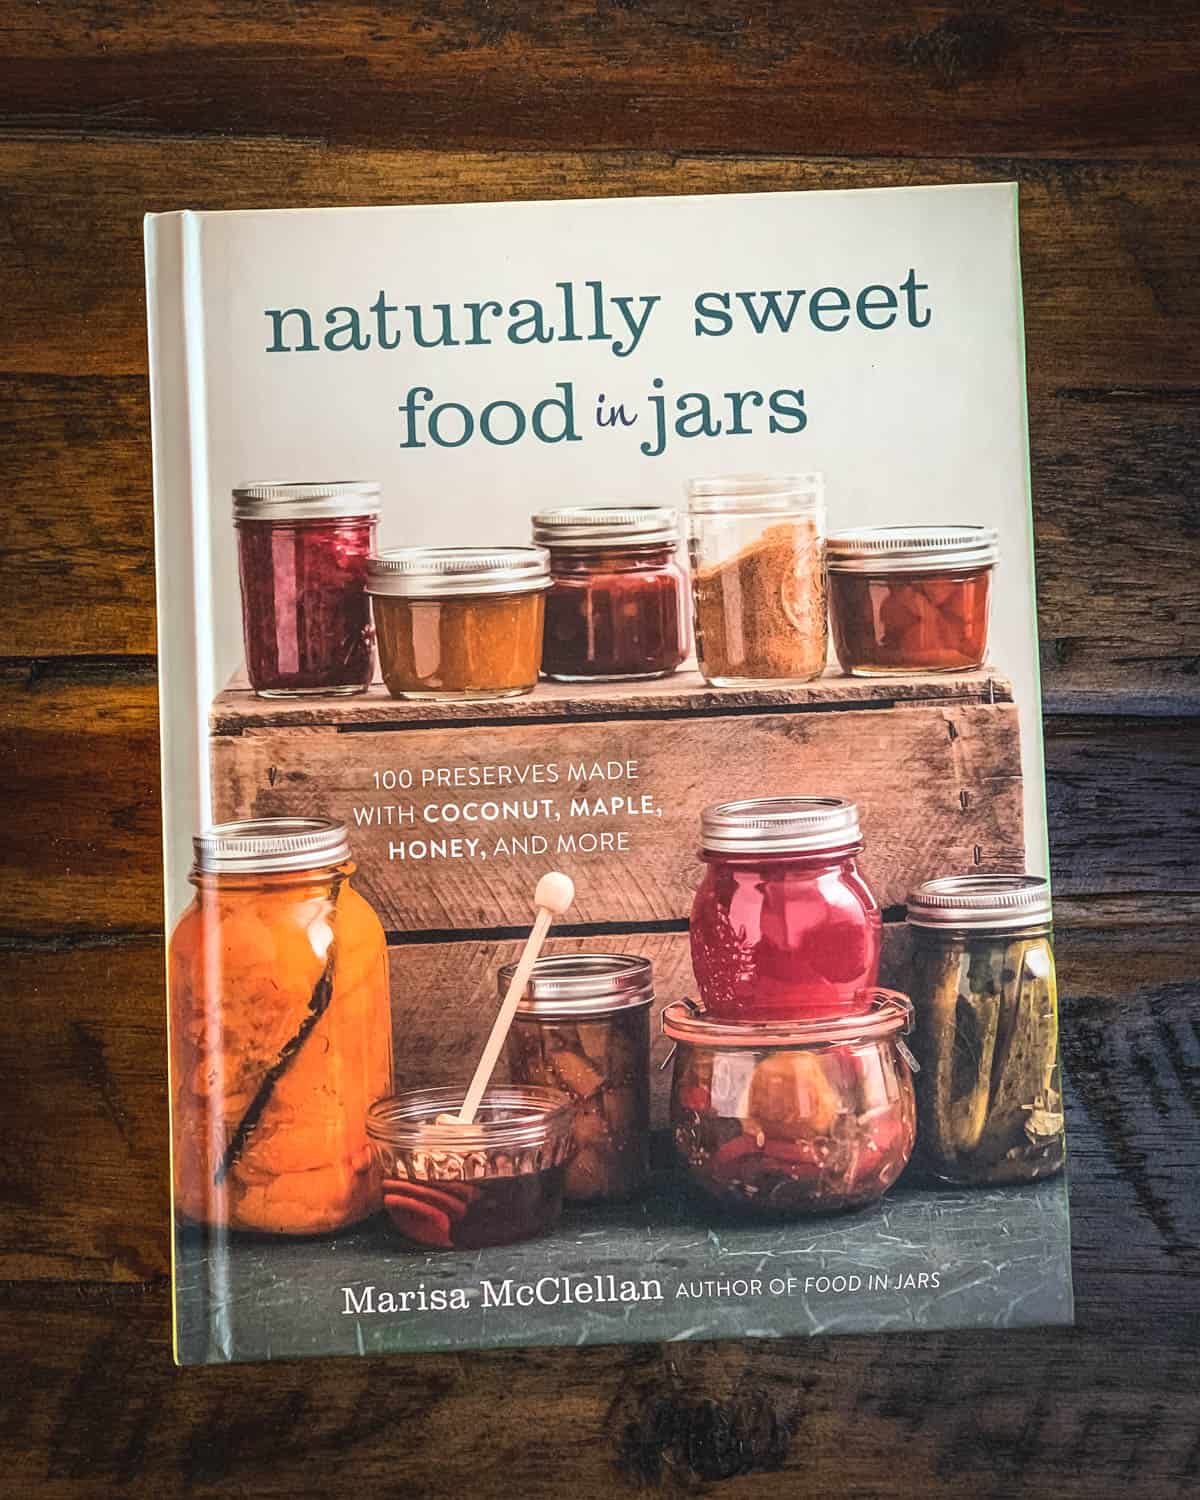 The book Naturally Sweet Food in Jars on a wooden table